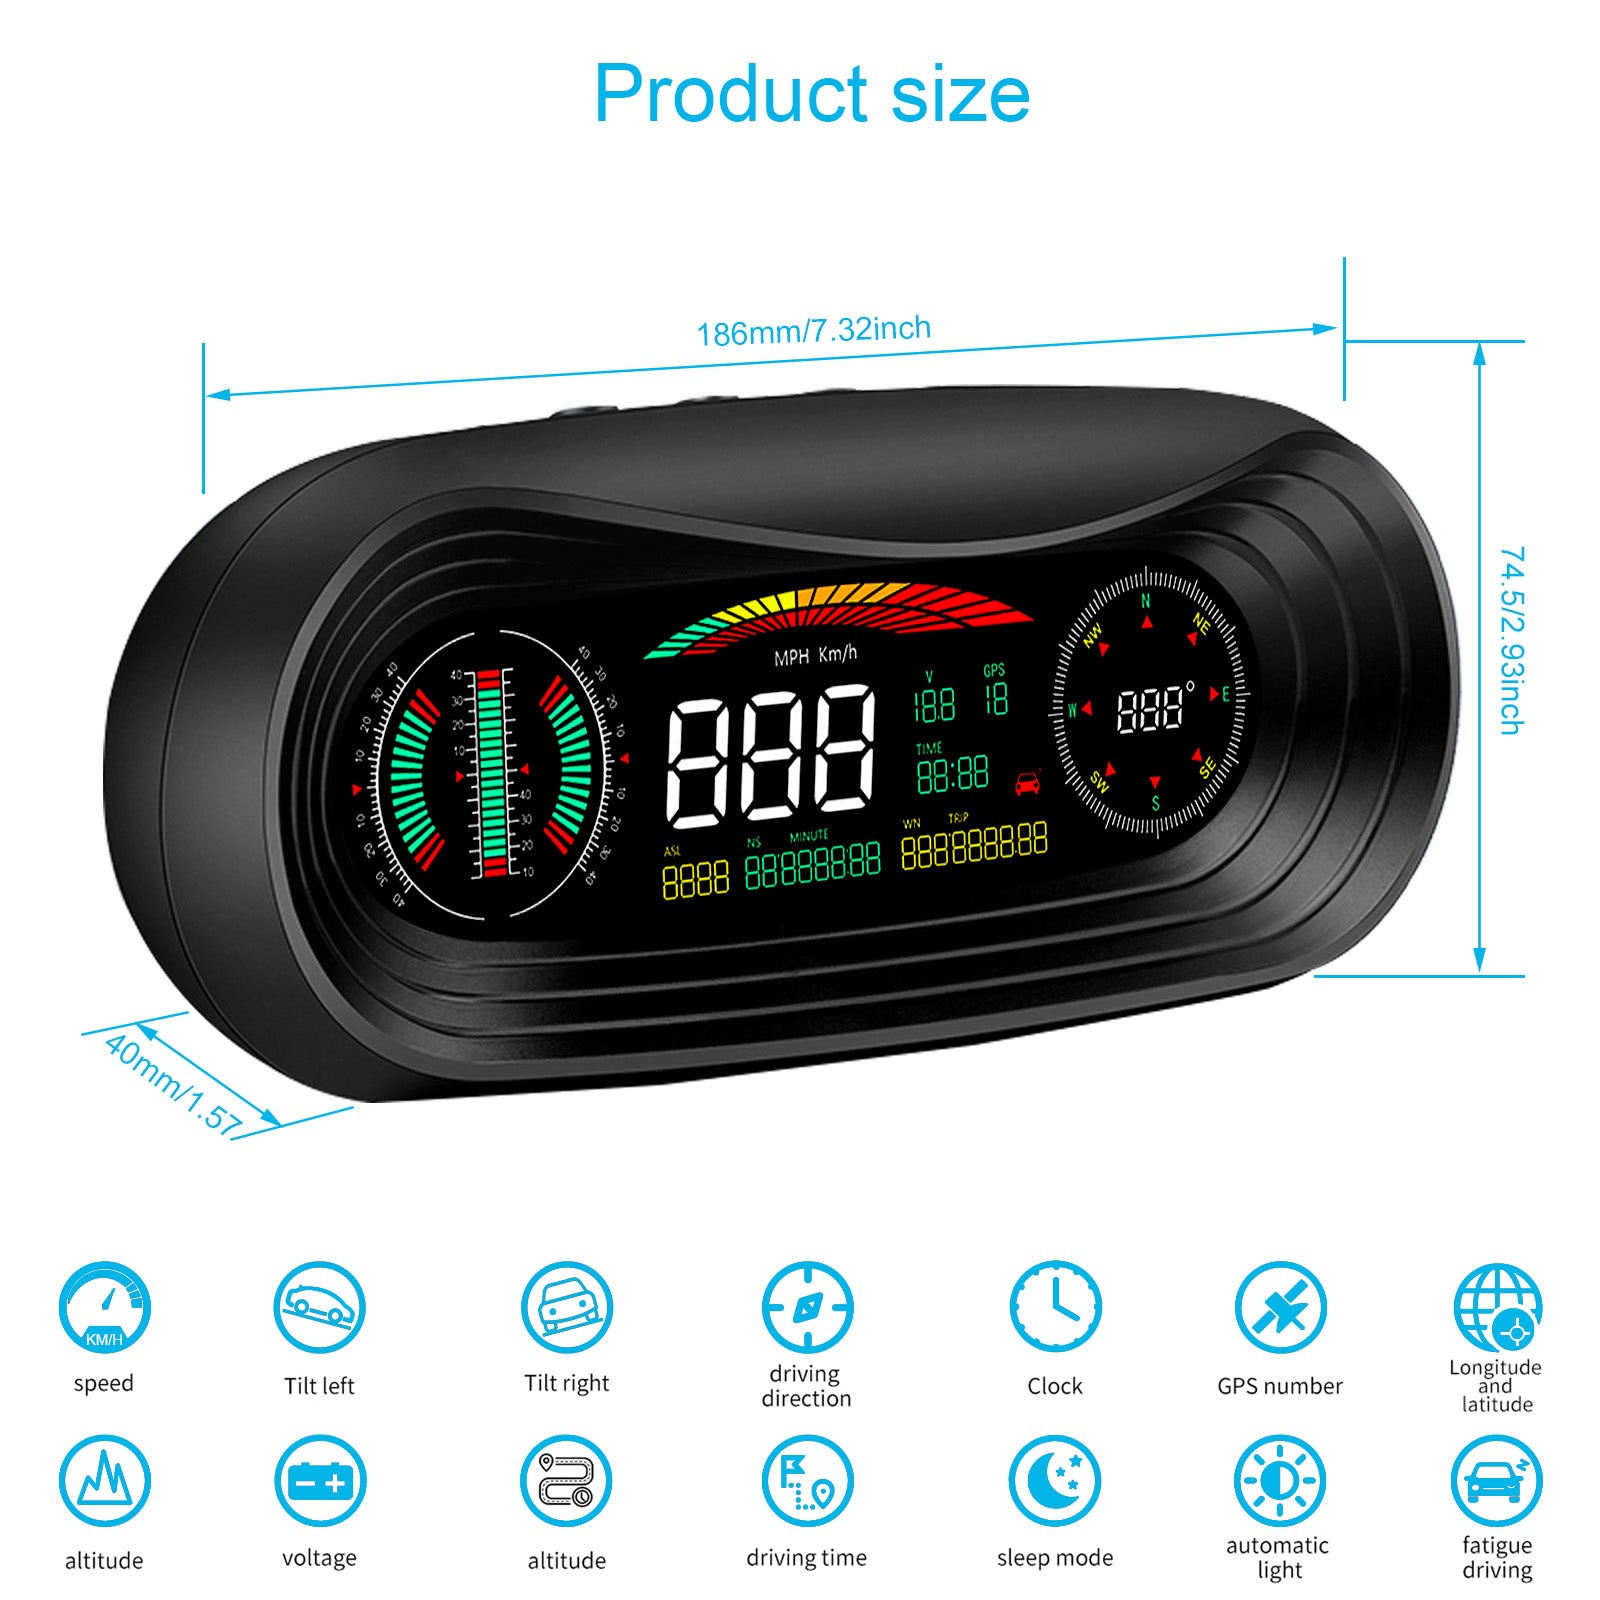 Head up Display Car Overhead Video Players GPS Speedometer with Speed OverSpeed Alarm KMH/MPH Mileage Measurement for All Vehicles